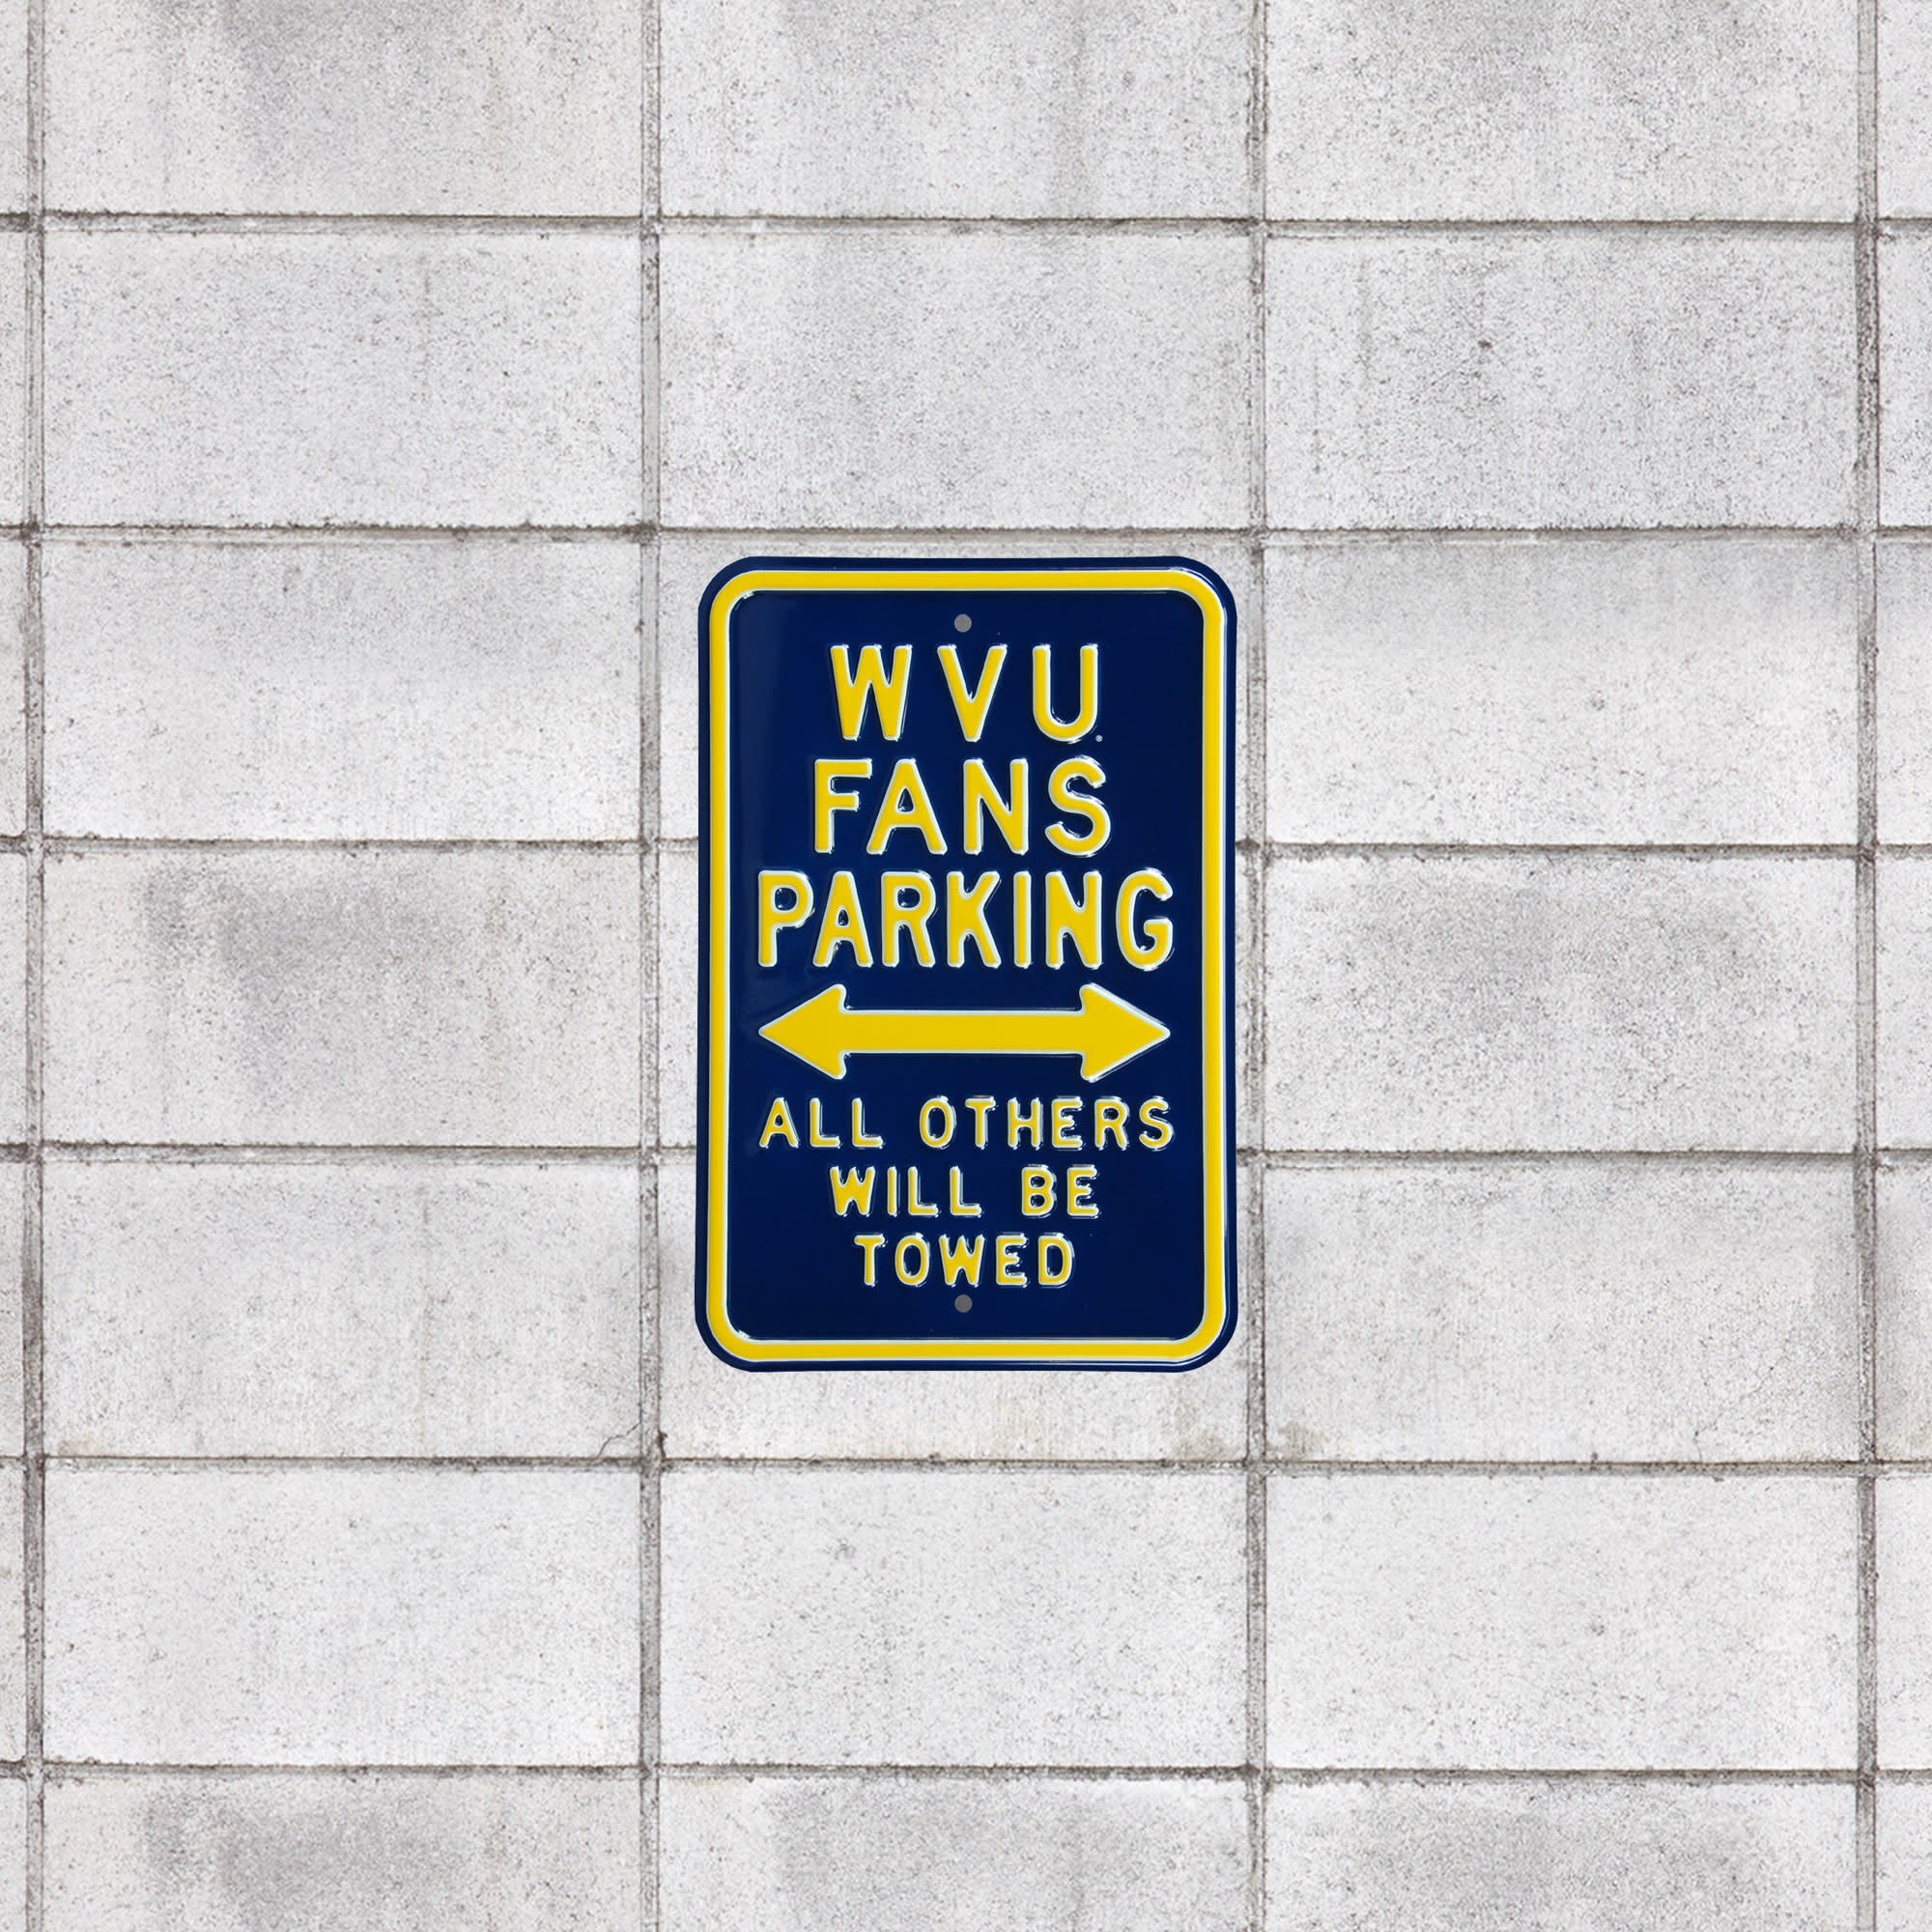 West Virginia Mountaineers: All Other Towed Parking - Officially Licensed Metal Street Sign 18.0"W x 12.0"H by Fathead | 100% St